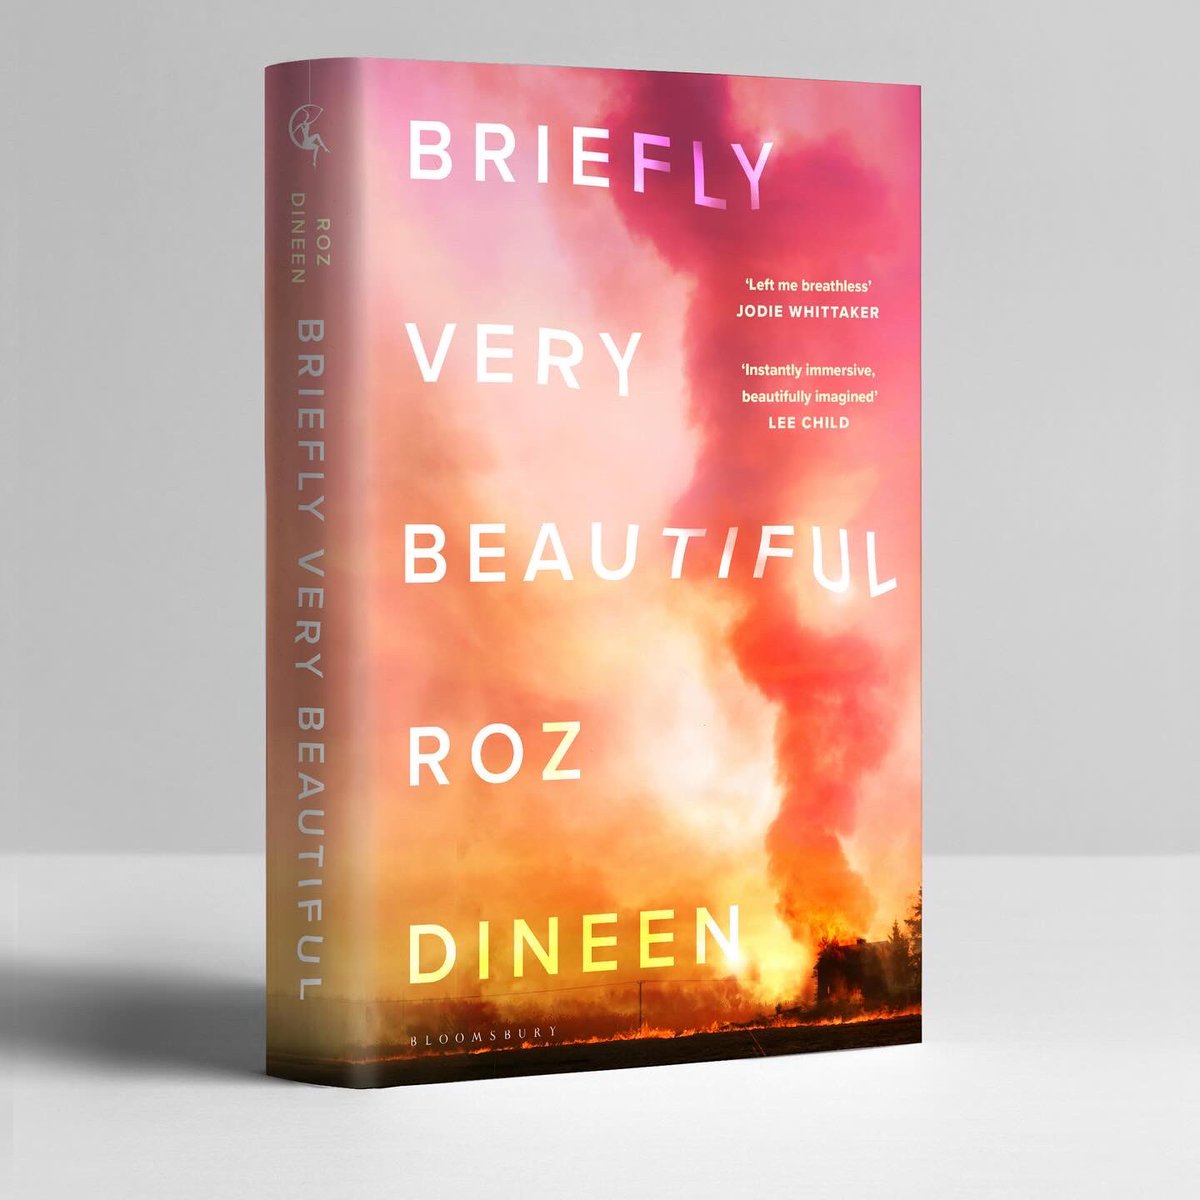 New work for Roz Dineen’s outstanding debut novel. Briefly Very Beautiful is out in June @BloomsburyBooks